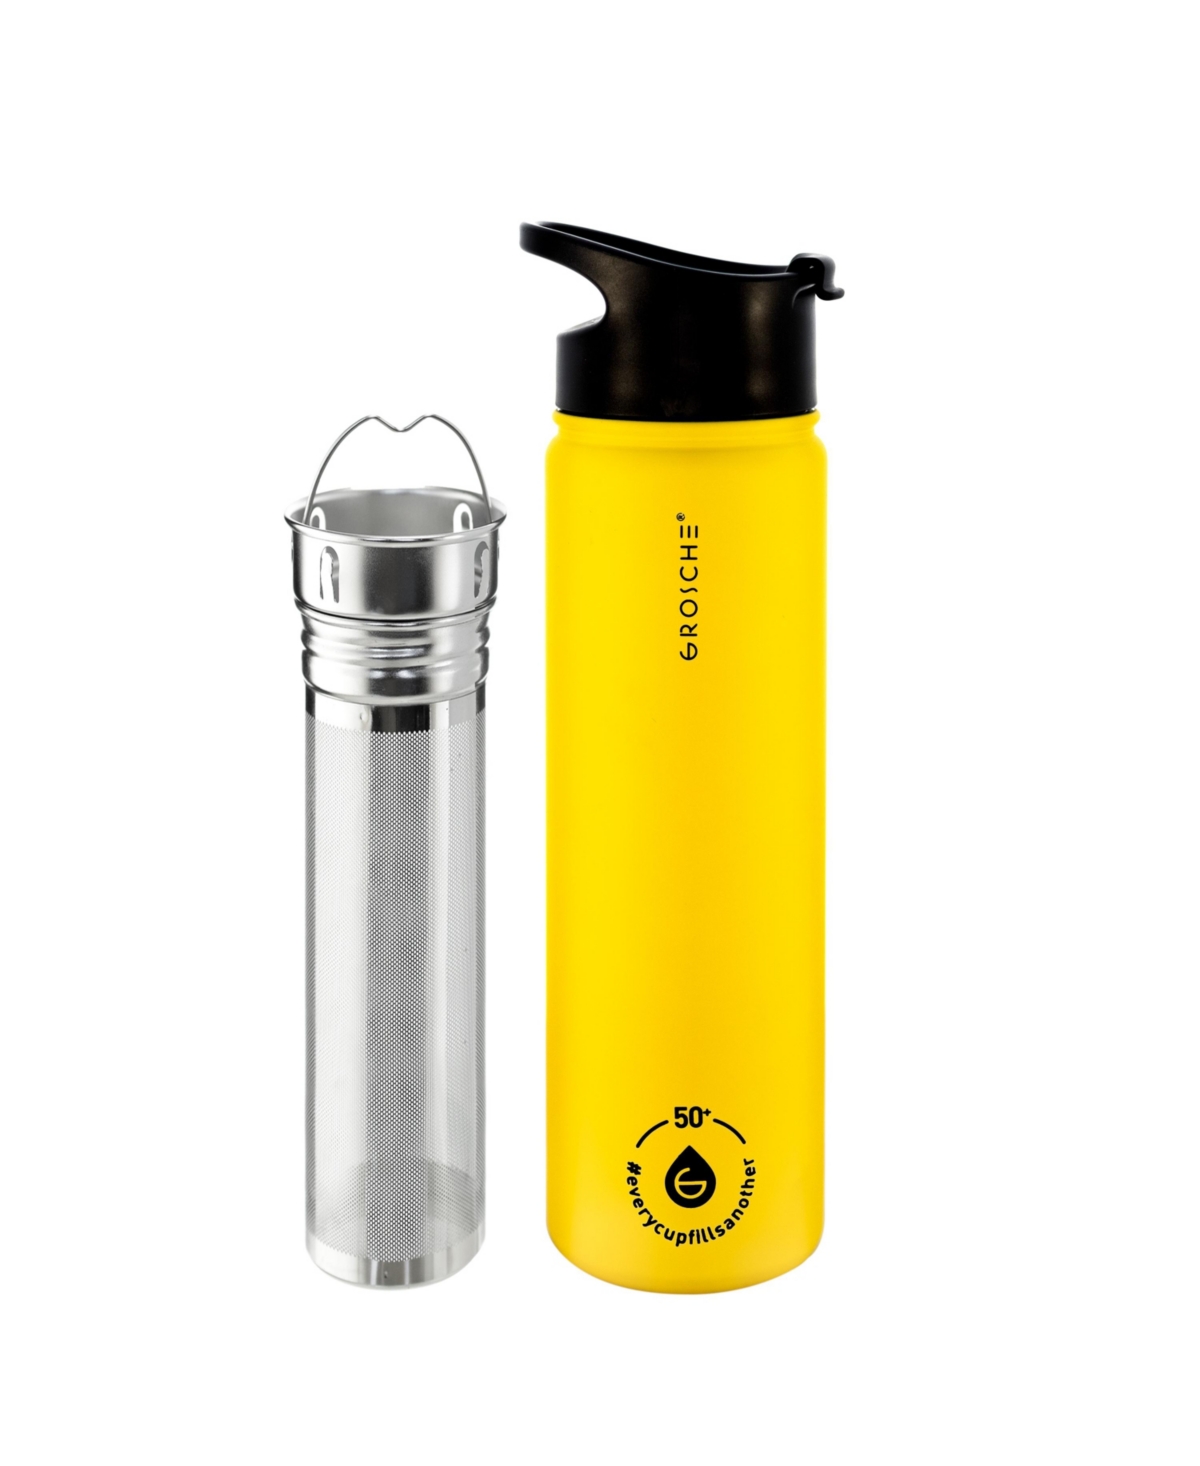 Grosche Chicago Steel Insulated Tea Infusion Flask, Tea And Coffee Tumbler, 22 Fluid oz In Honey Yellow